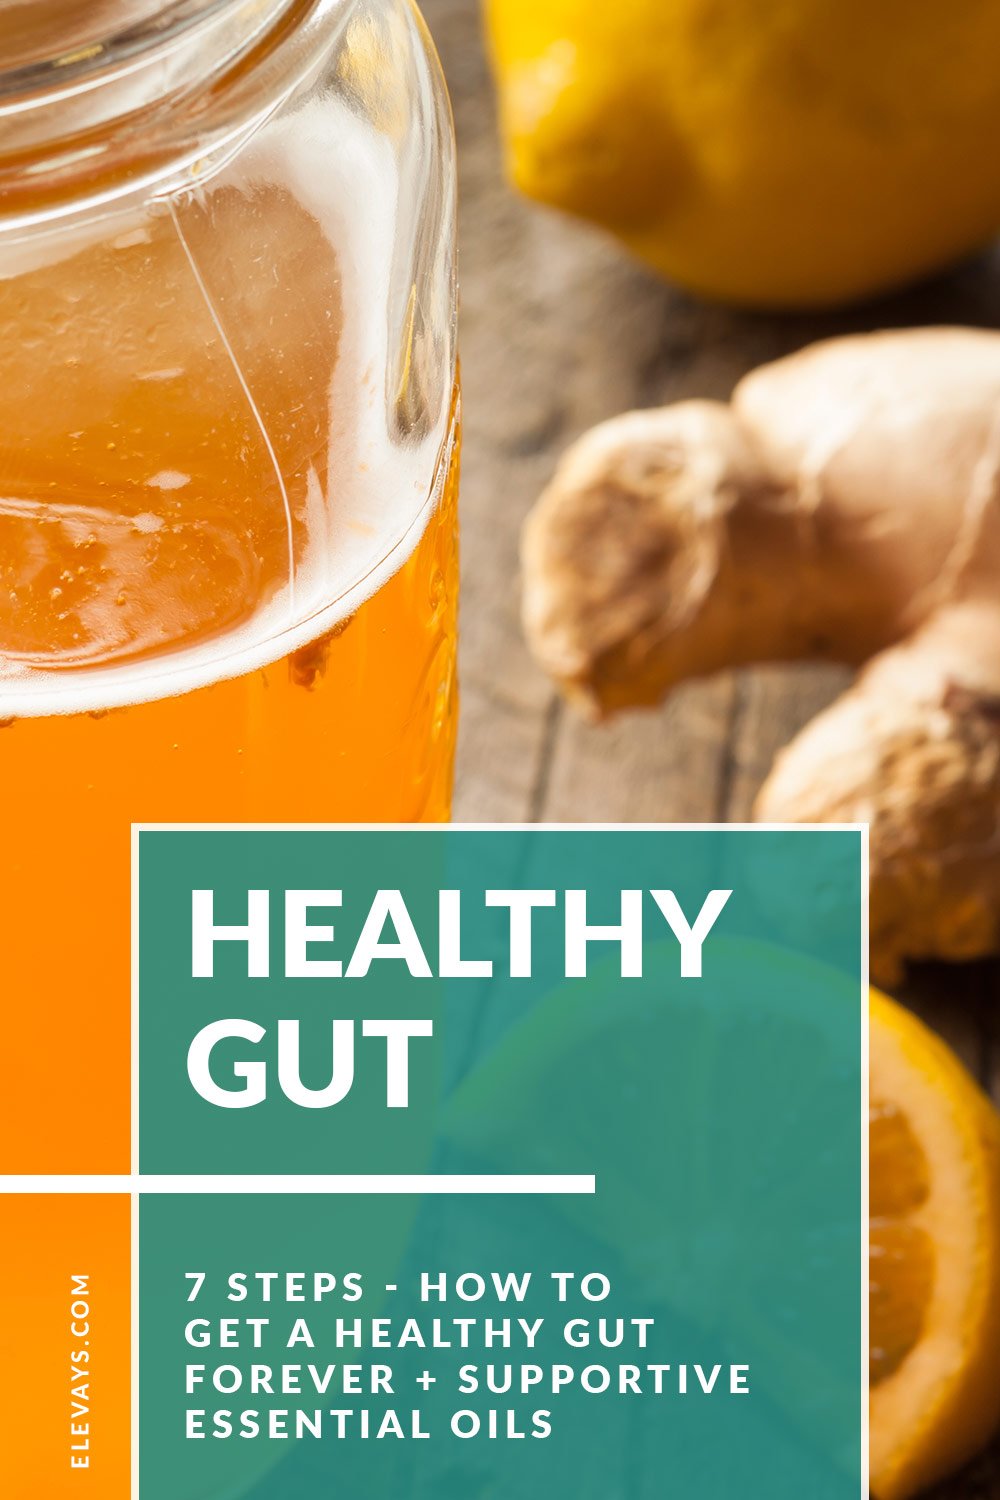 How to Get a Healthy Gut Forever + Supportive Essential Oils for Gut Health